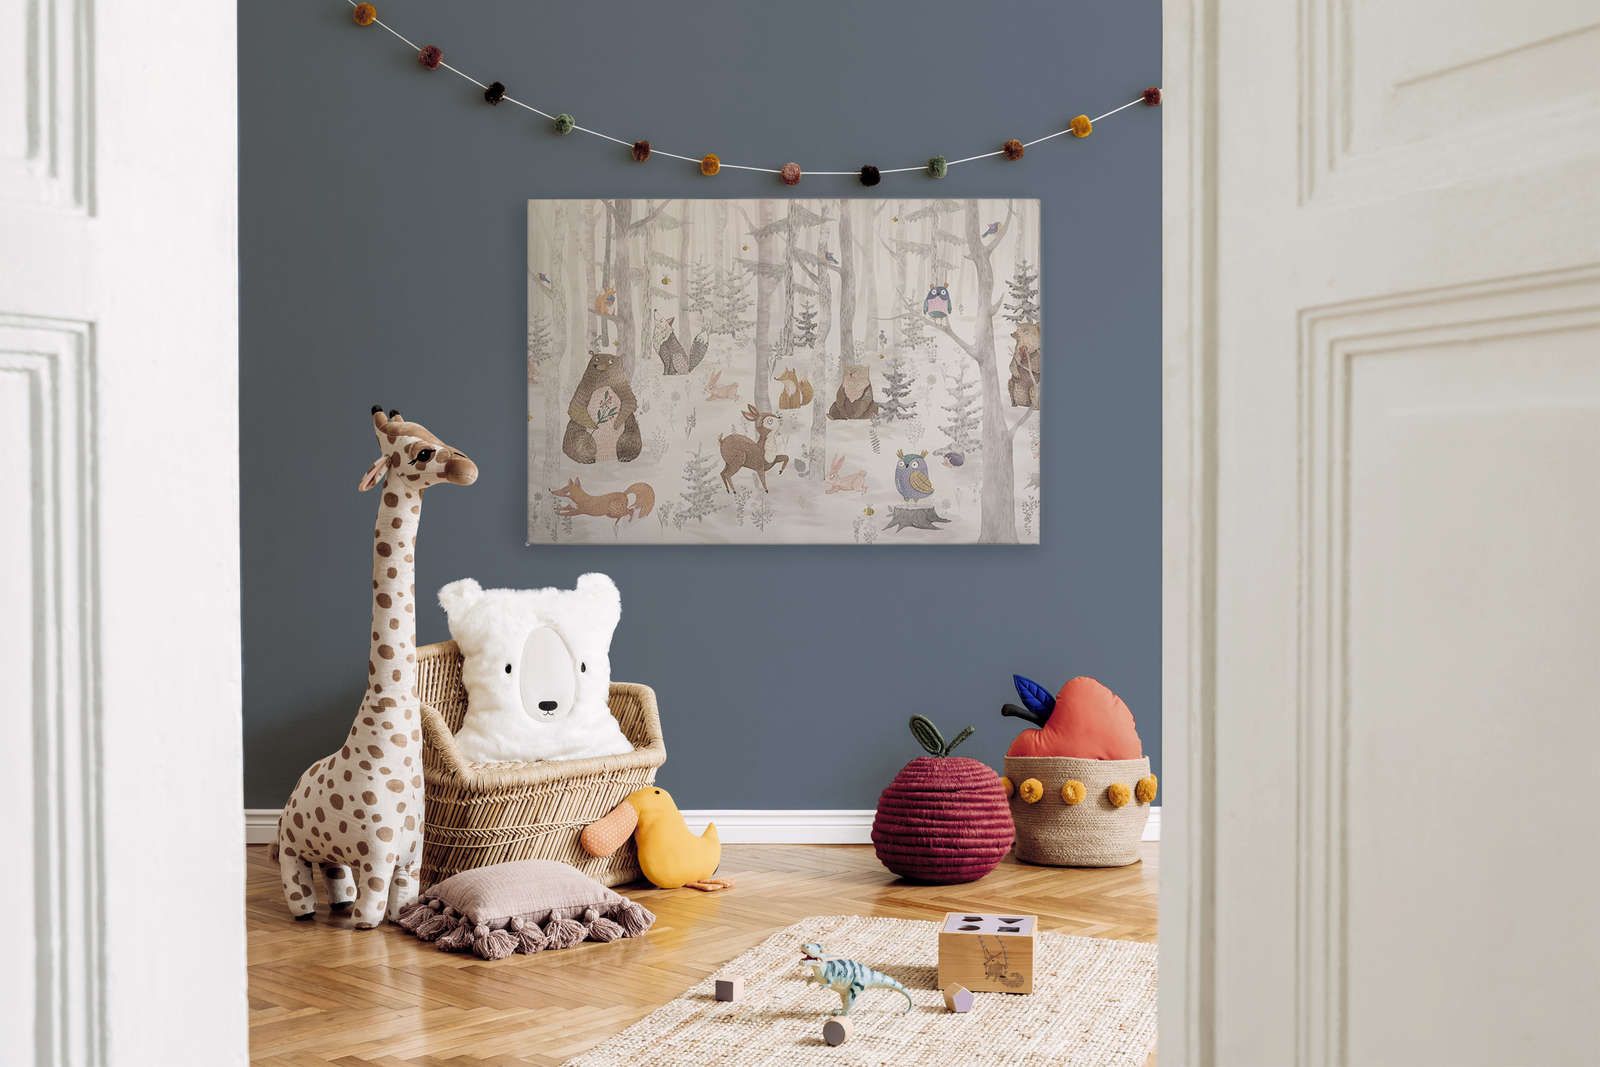             Canvas Enchanted Forest with Animals - 120 cm x 80 cm
        